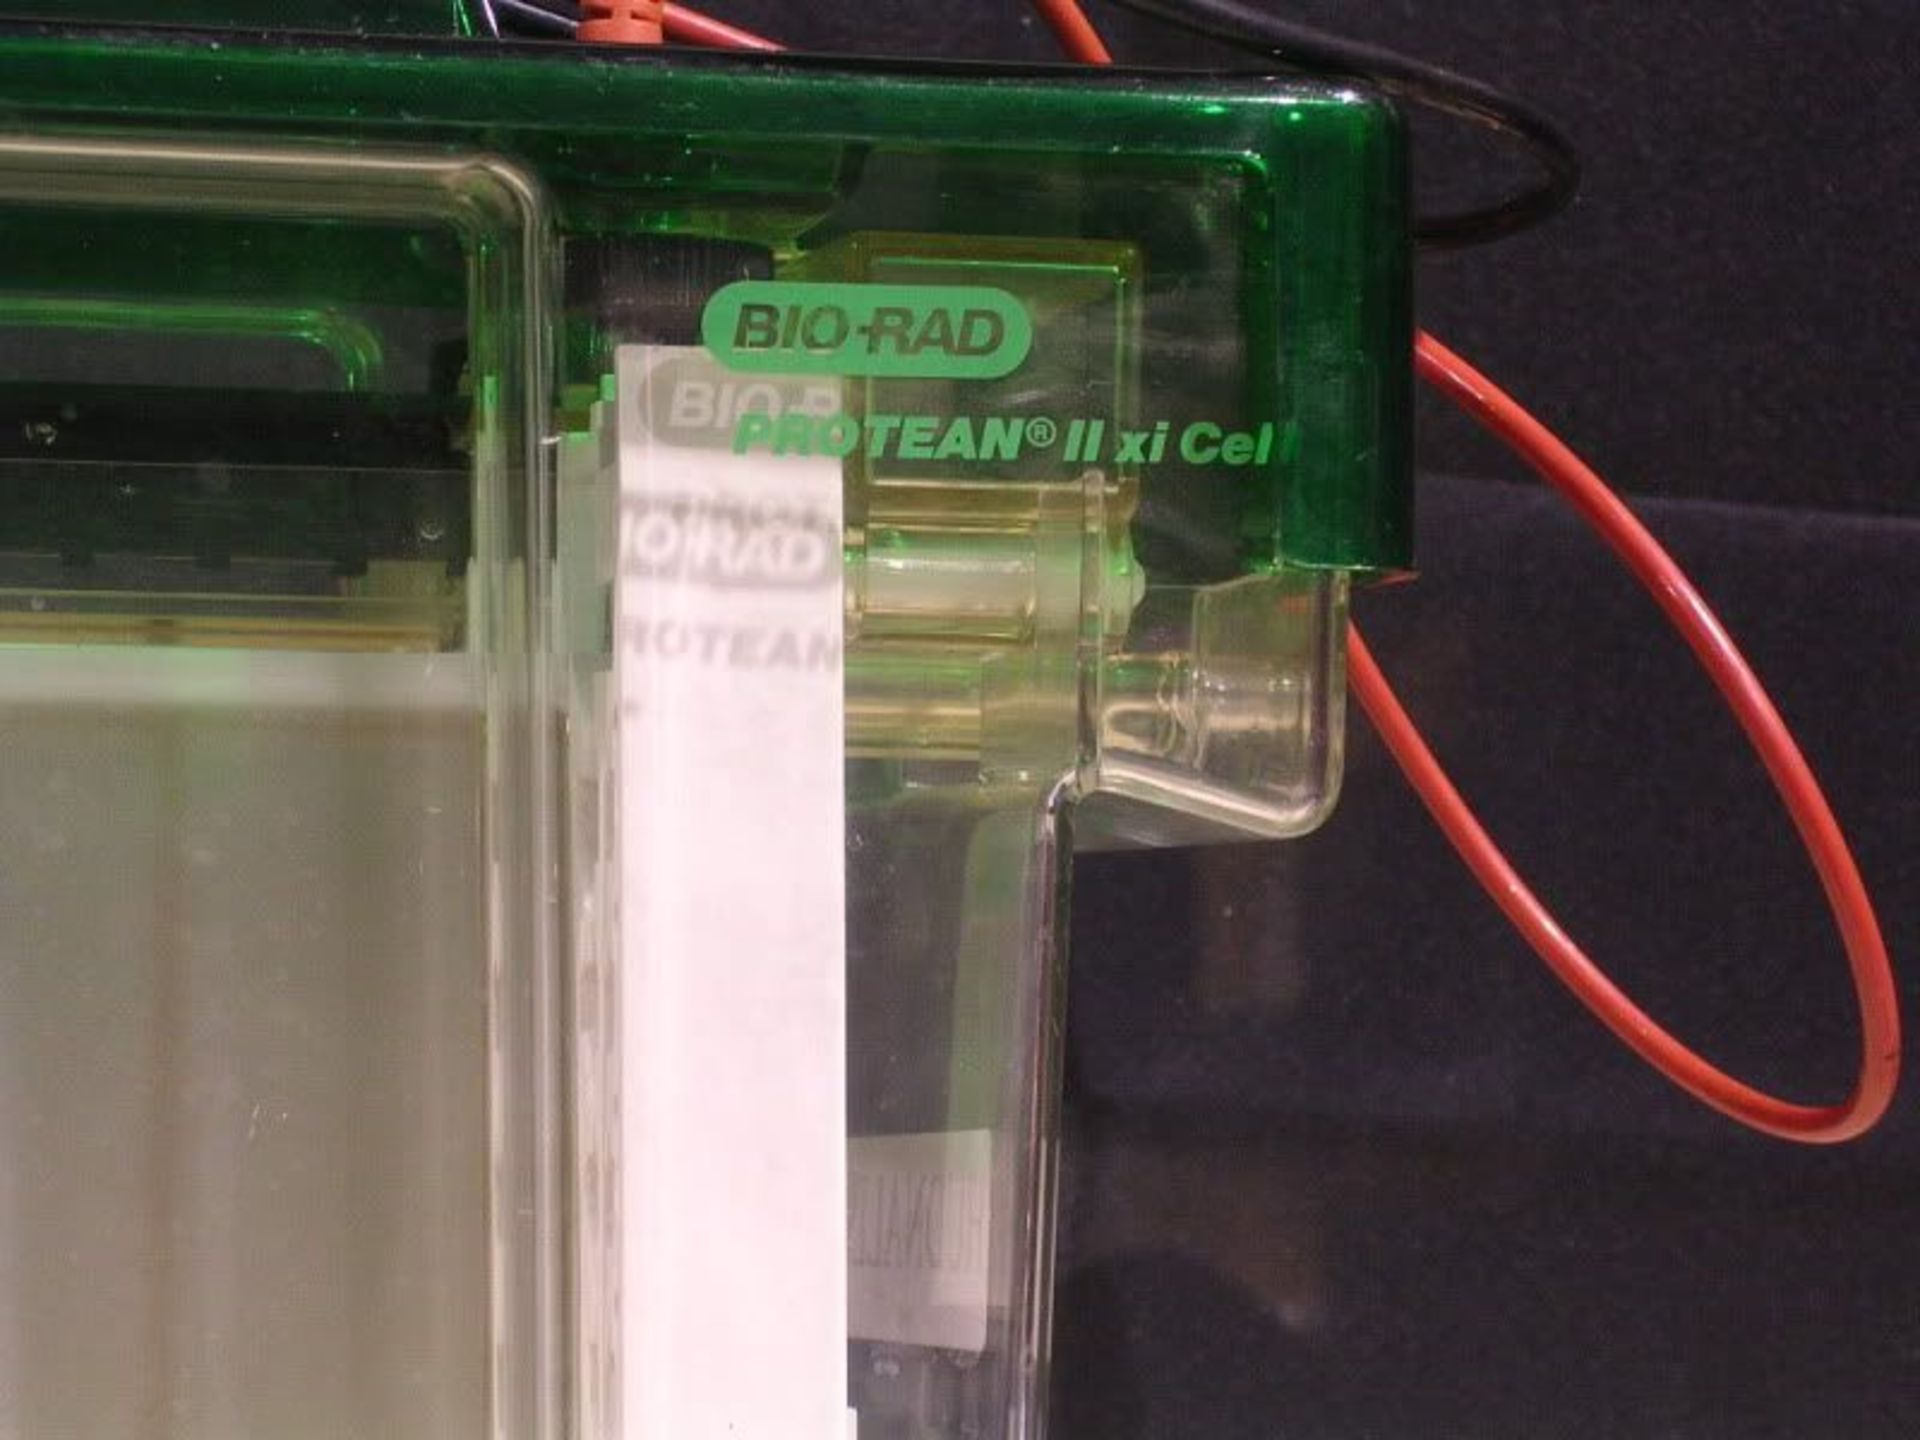 BIO RAD Protean II xi Cell, Electrophoresis Cell, Qty 1, 331948552928 - Image 2 of 5